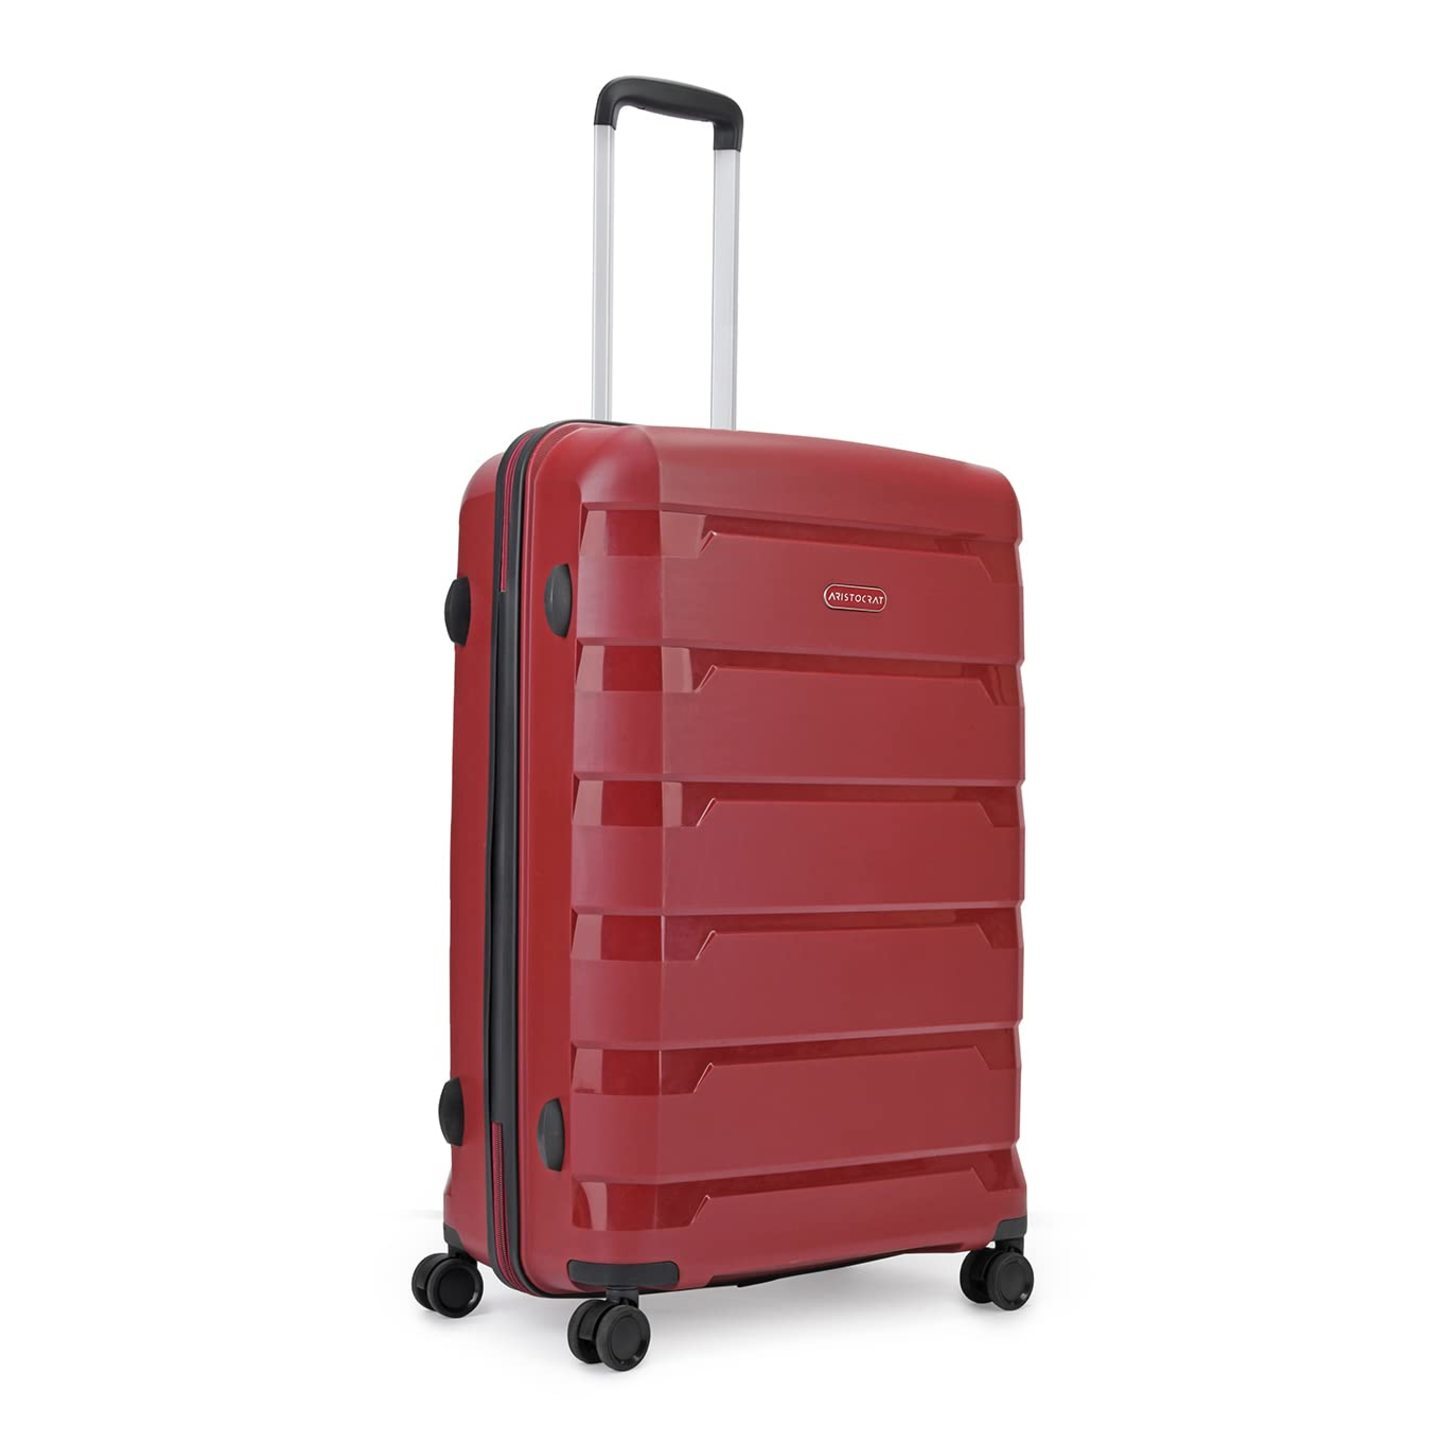 Aristocrat 55cm Hardsided Check-in Luggage